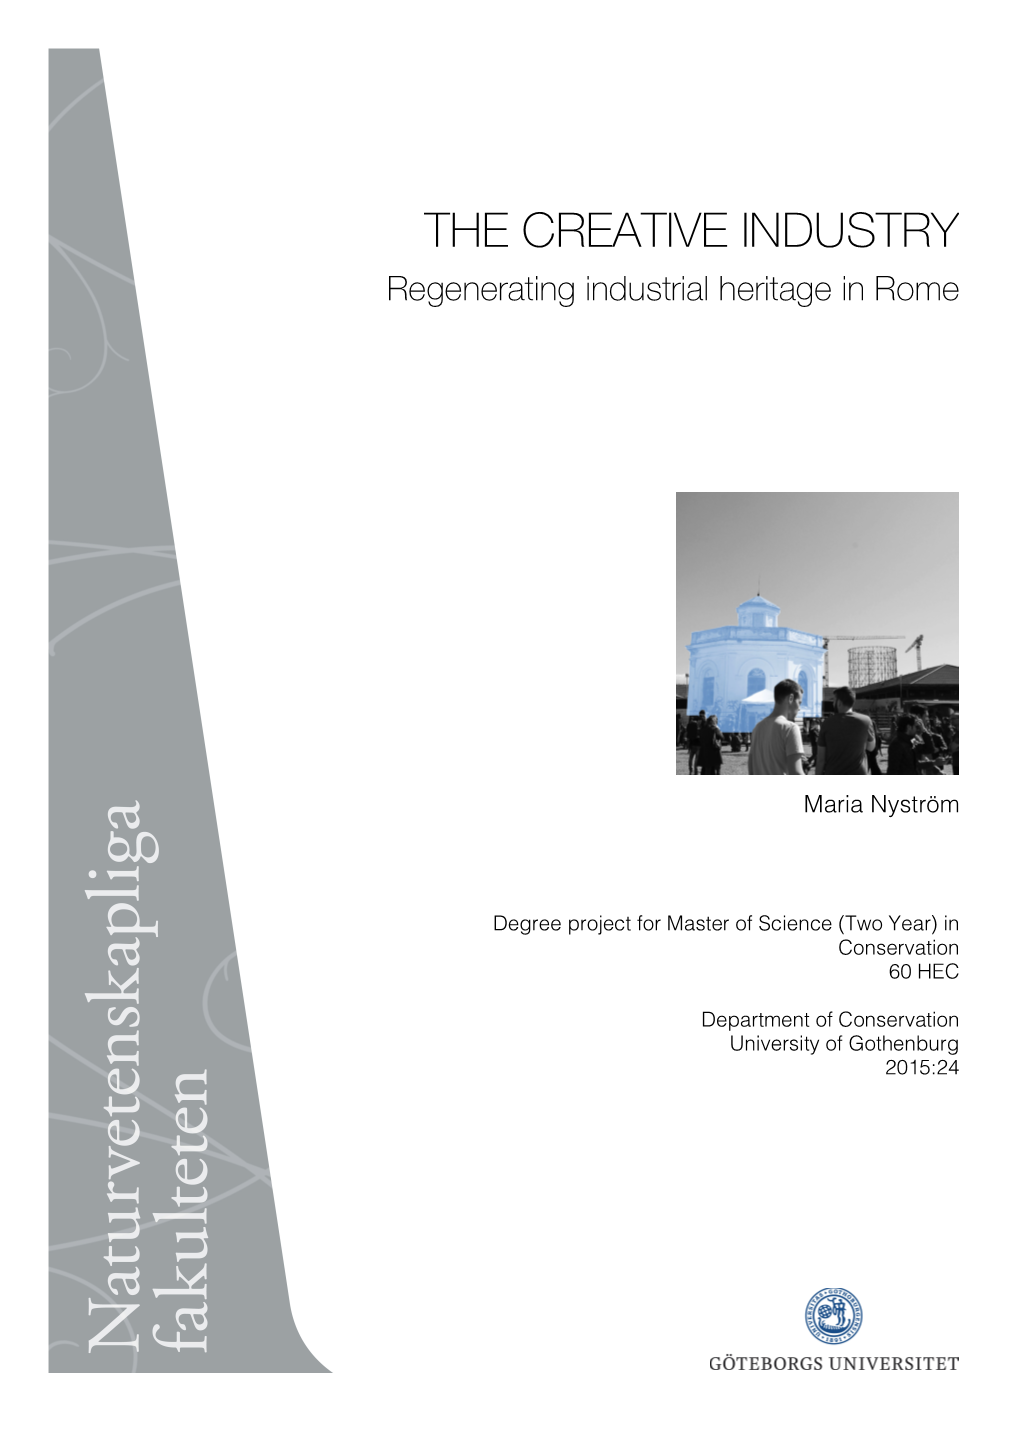 The Creative Industry